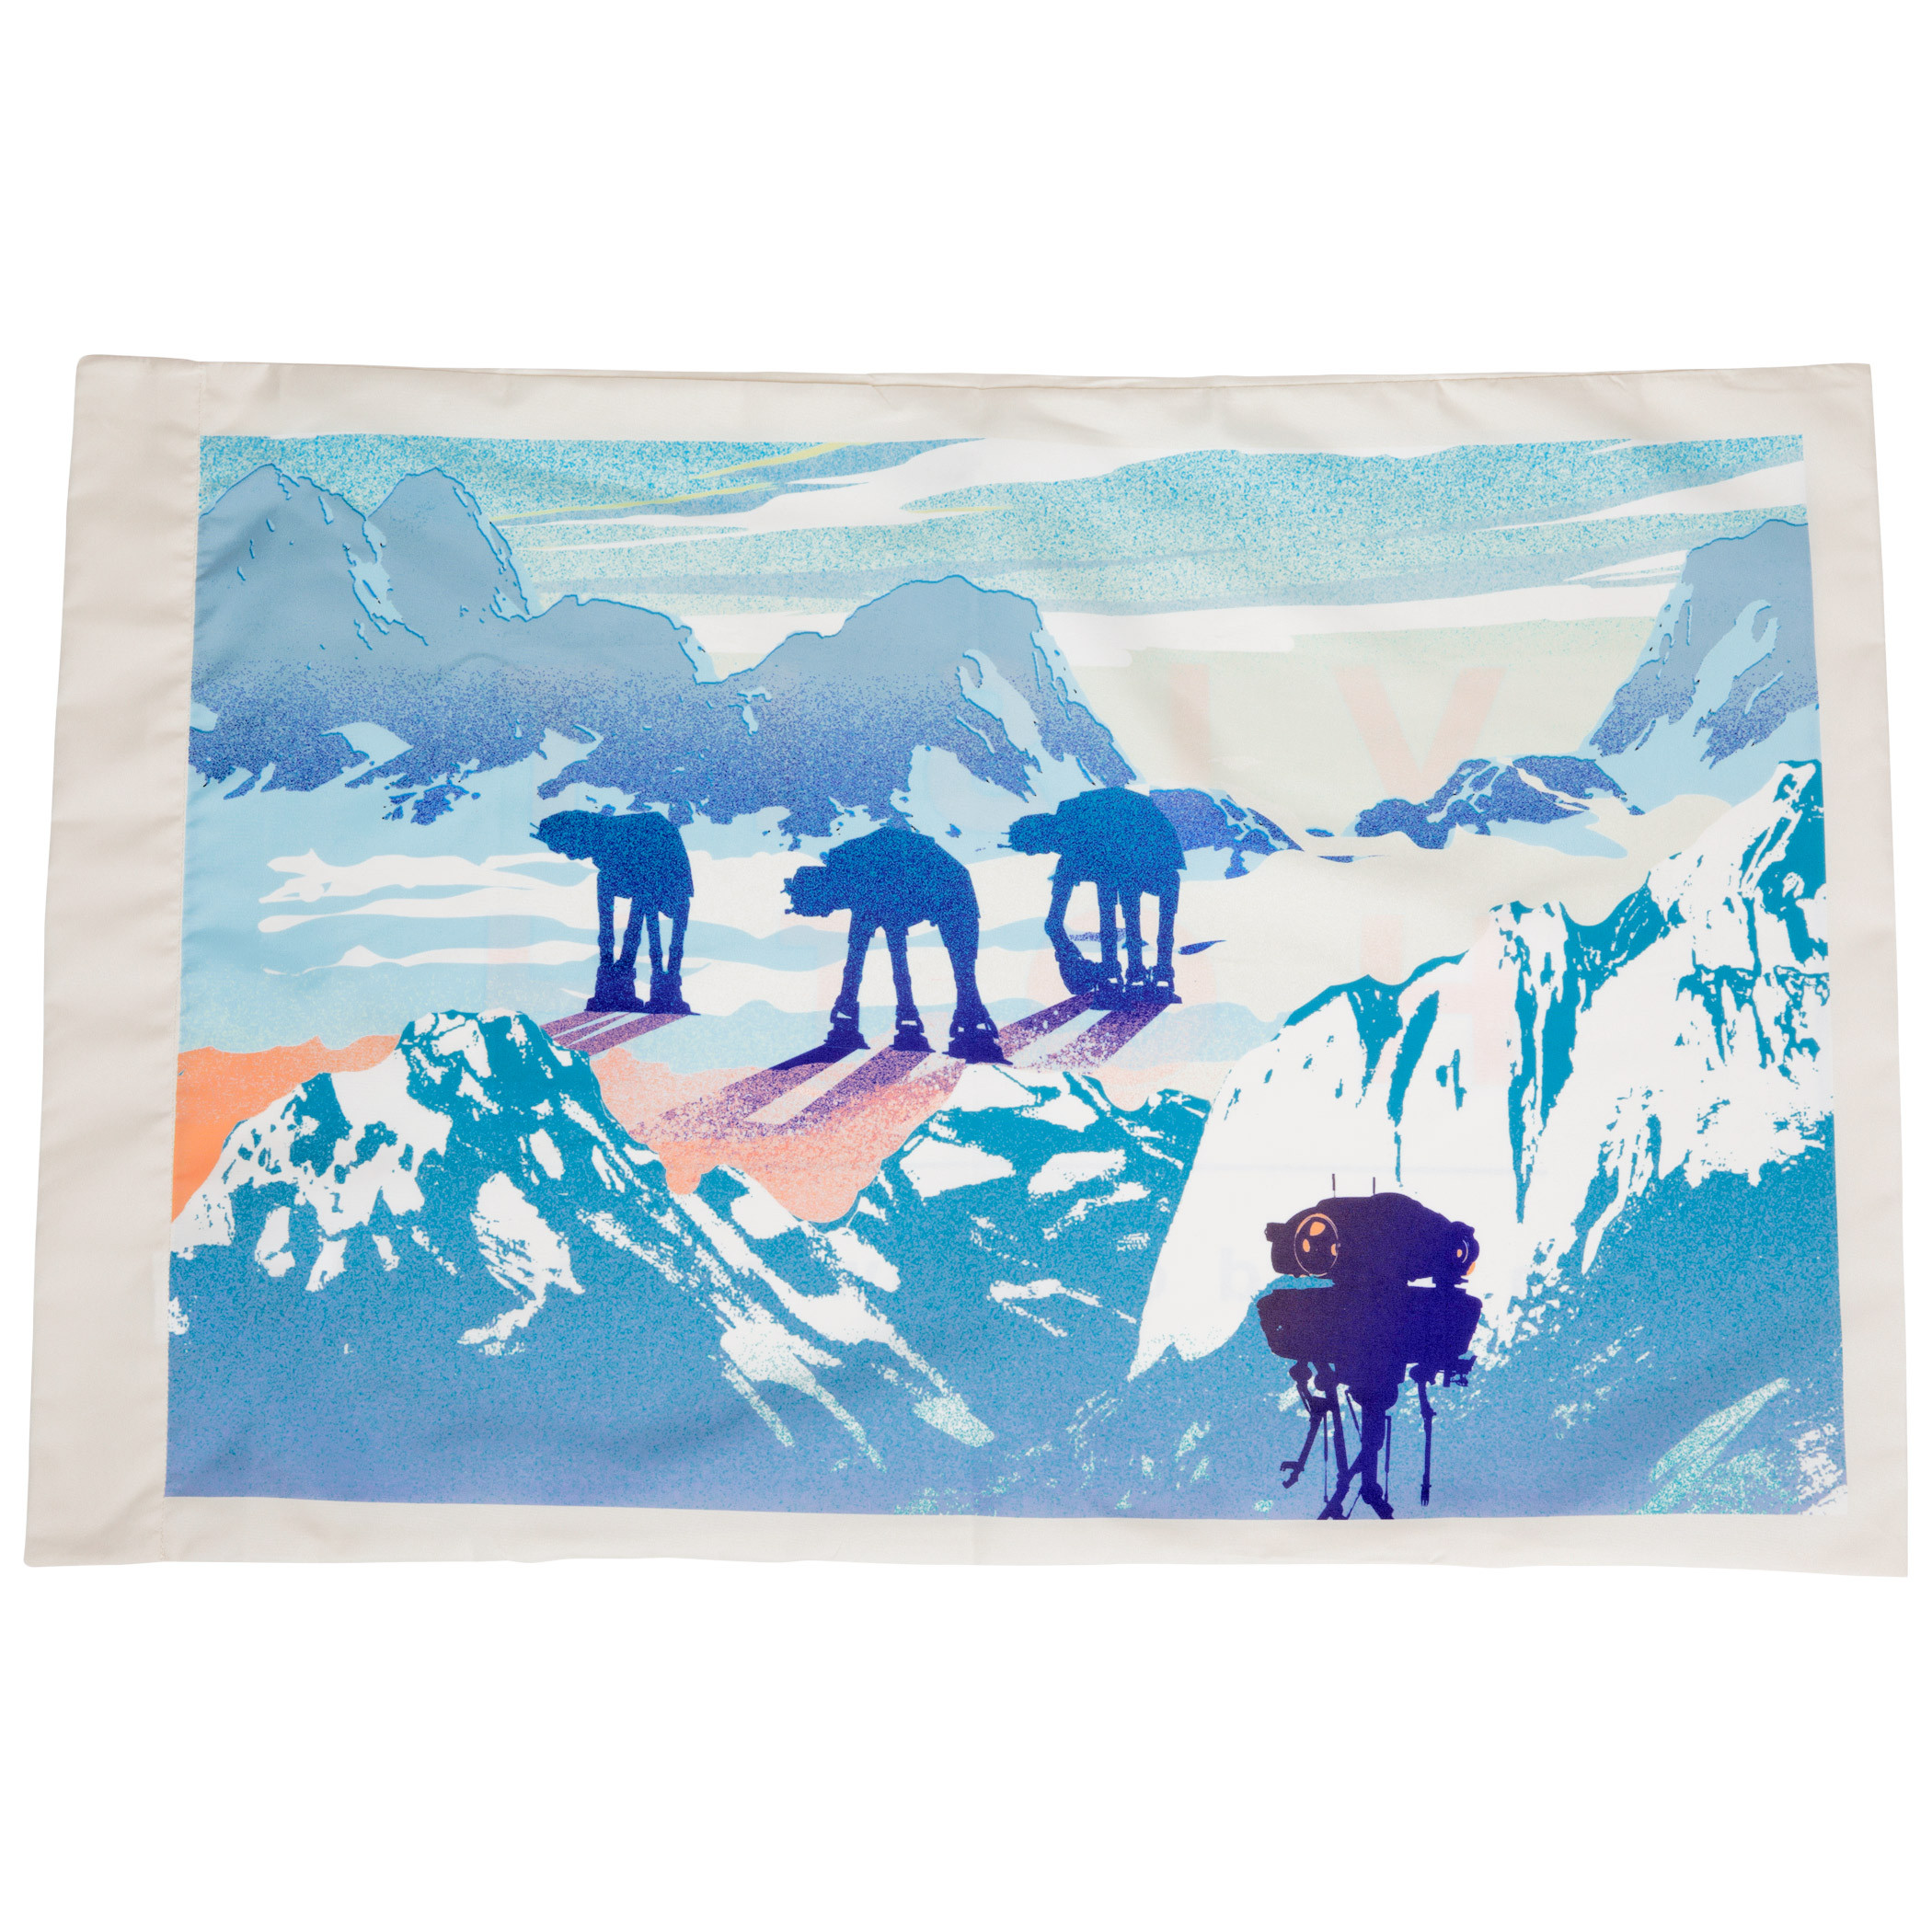 Star Wars Visit Hoth A World of Ice and Snow Pillowcase